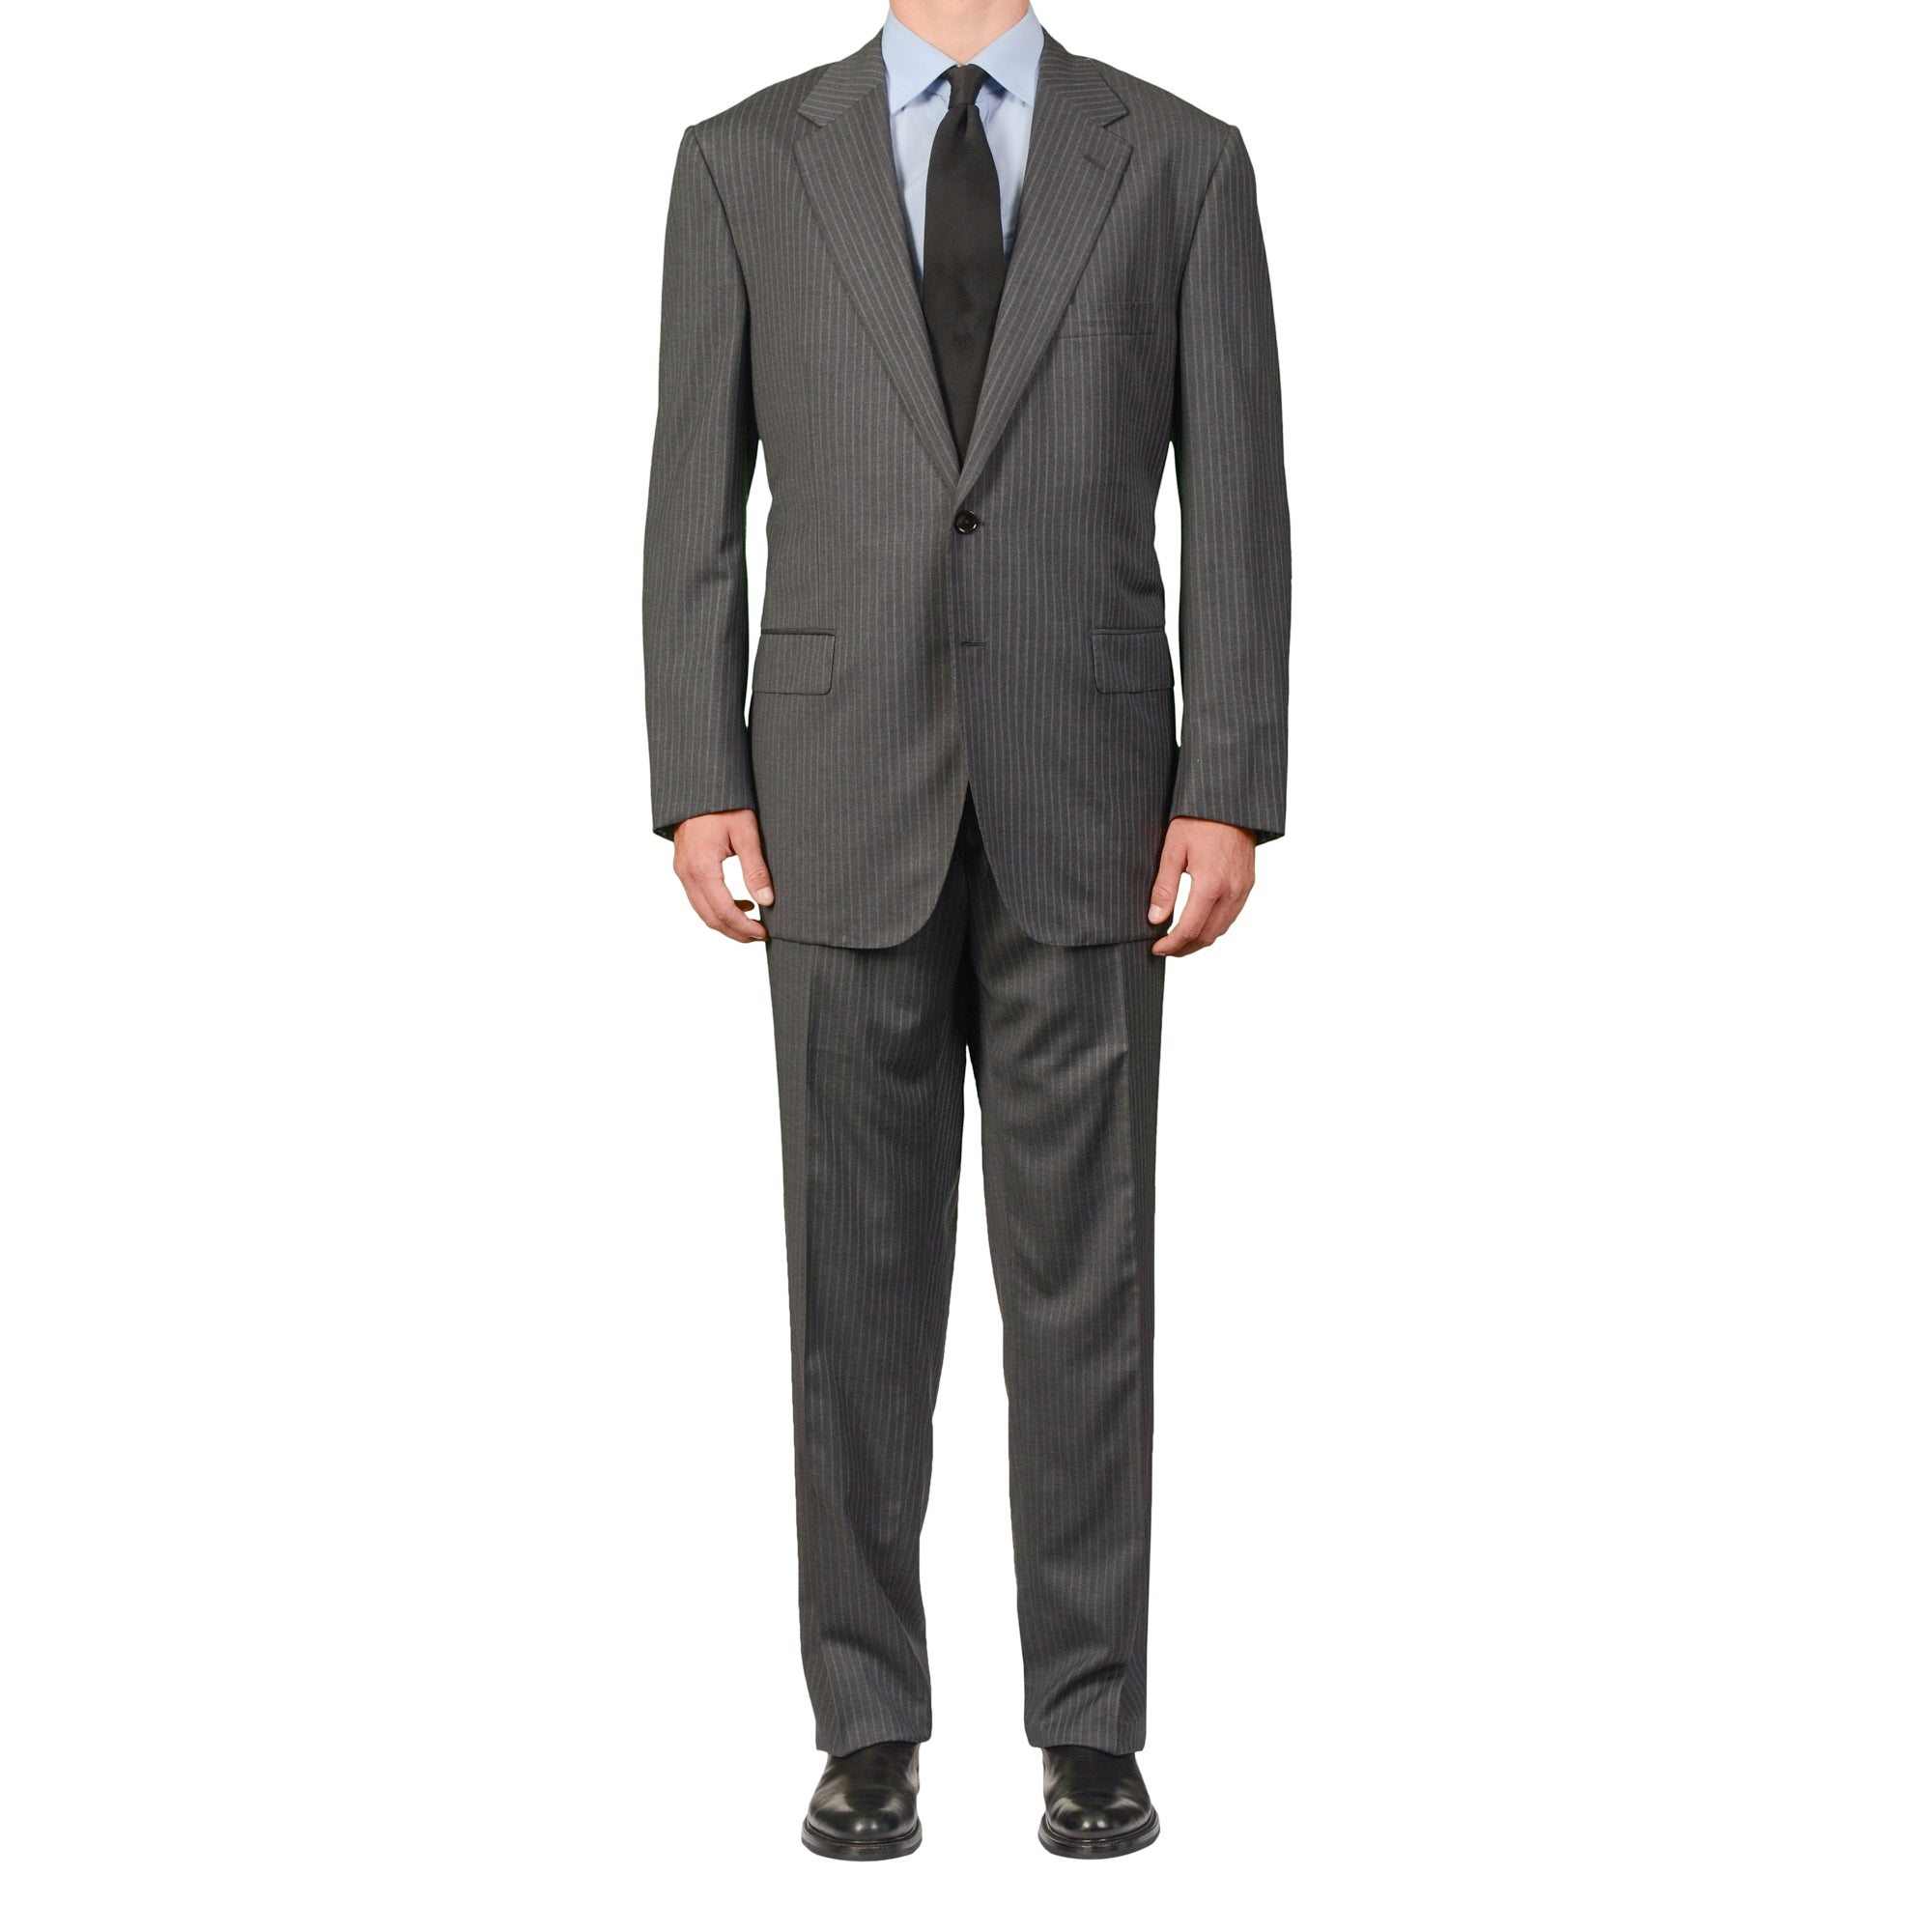 D'AVENZA for ACCADEMYA Handmade Gray Striped Wool Suit EU 60 NEW US 50 D'AVENZA